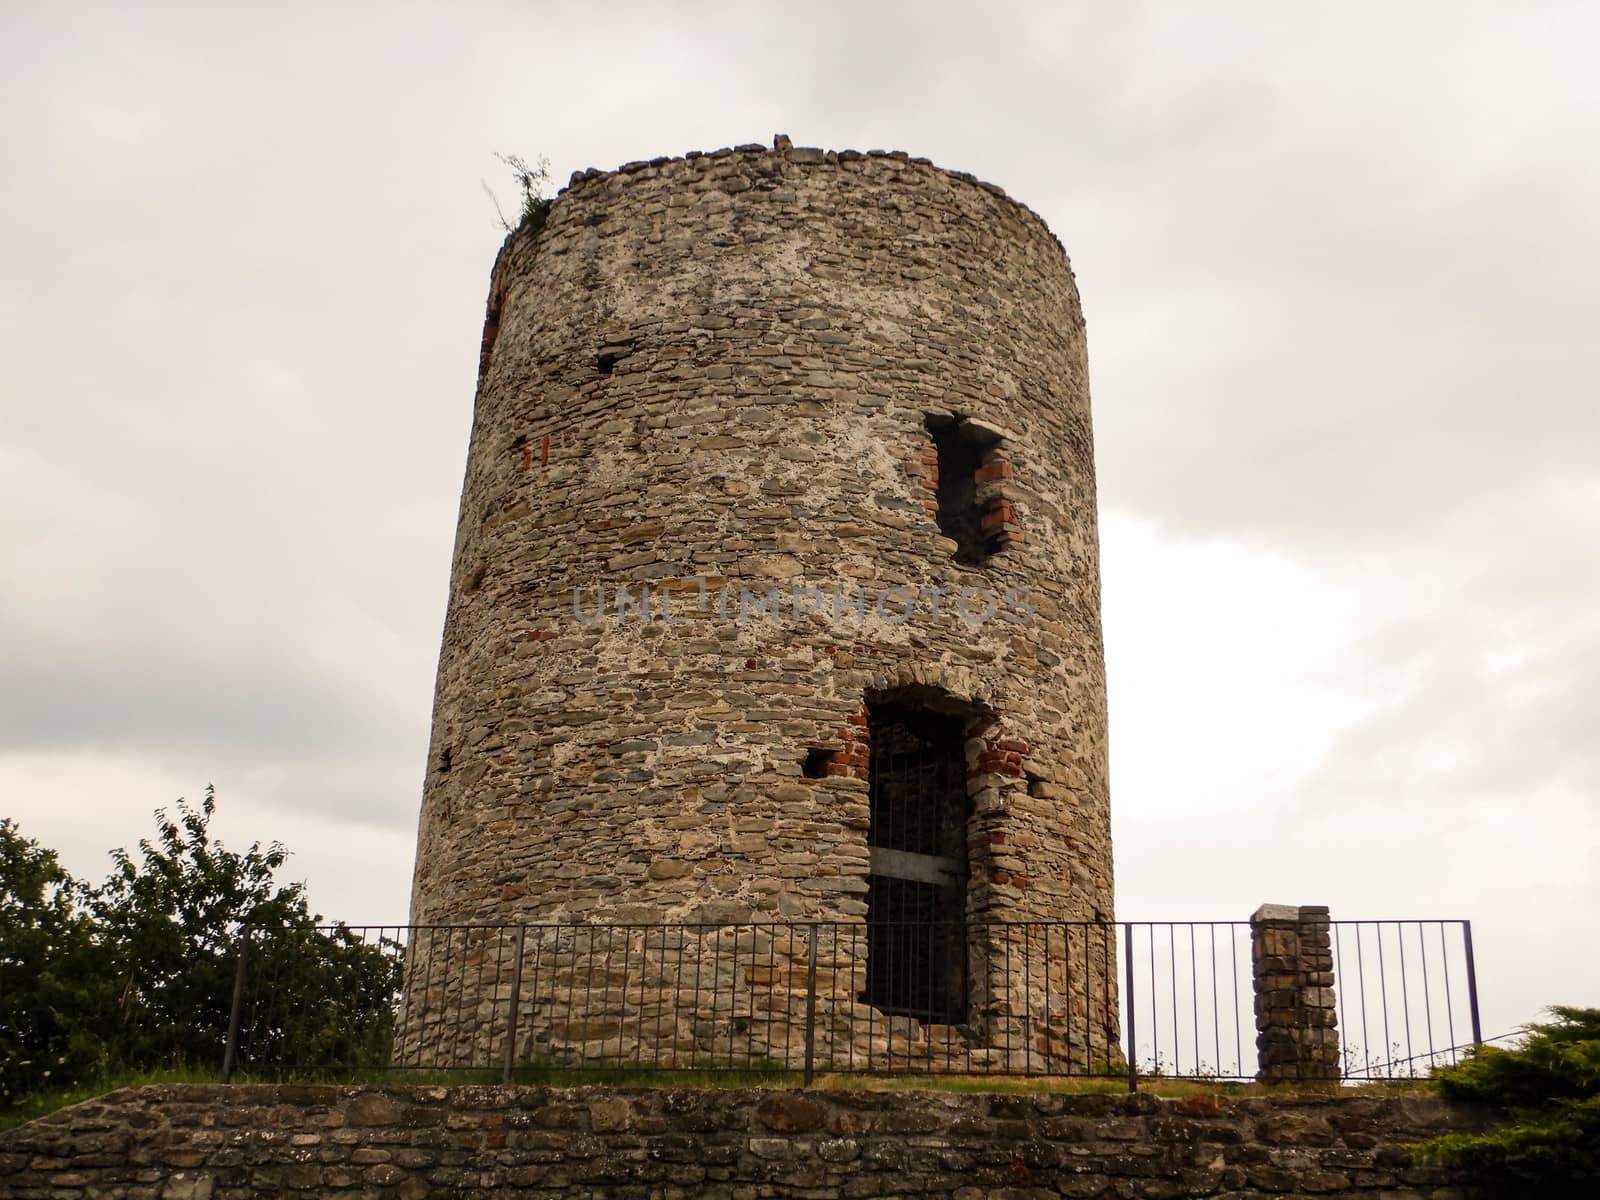 Ancient military tower later transformed into a mill in Murazzano, Piedmont - Italy